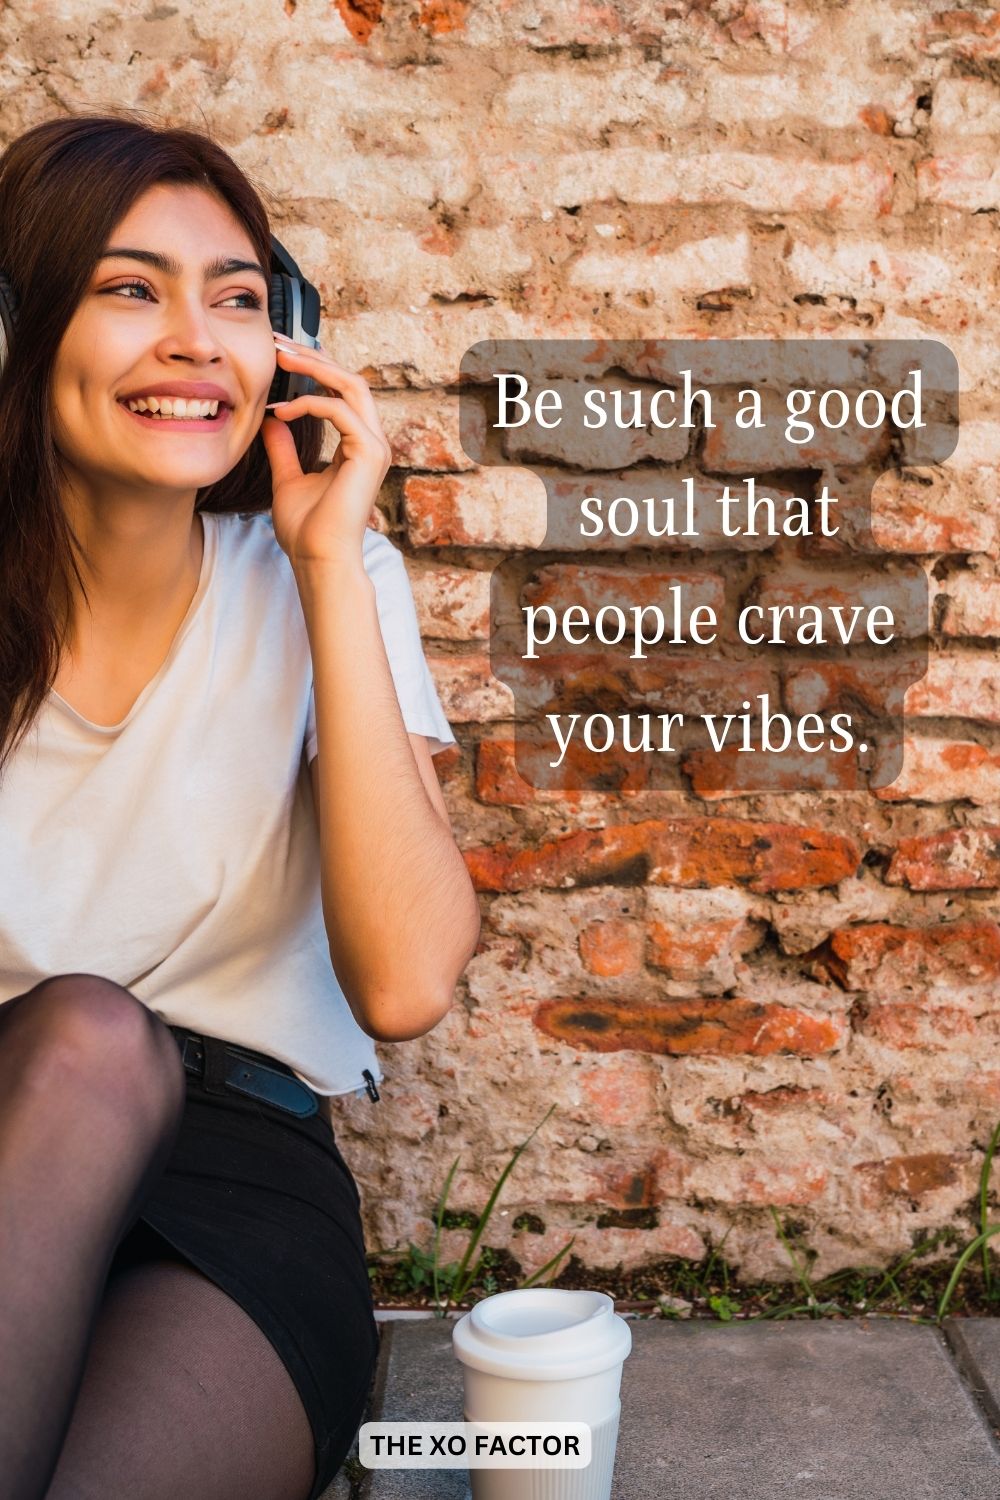 Be such a good soul that people crave your vibes.